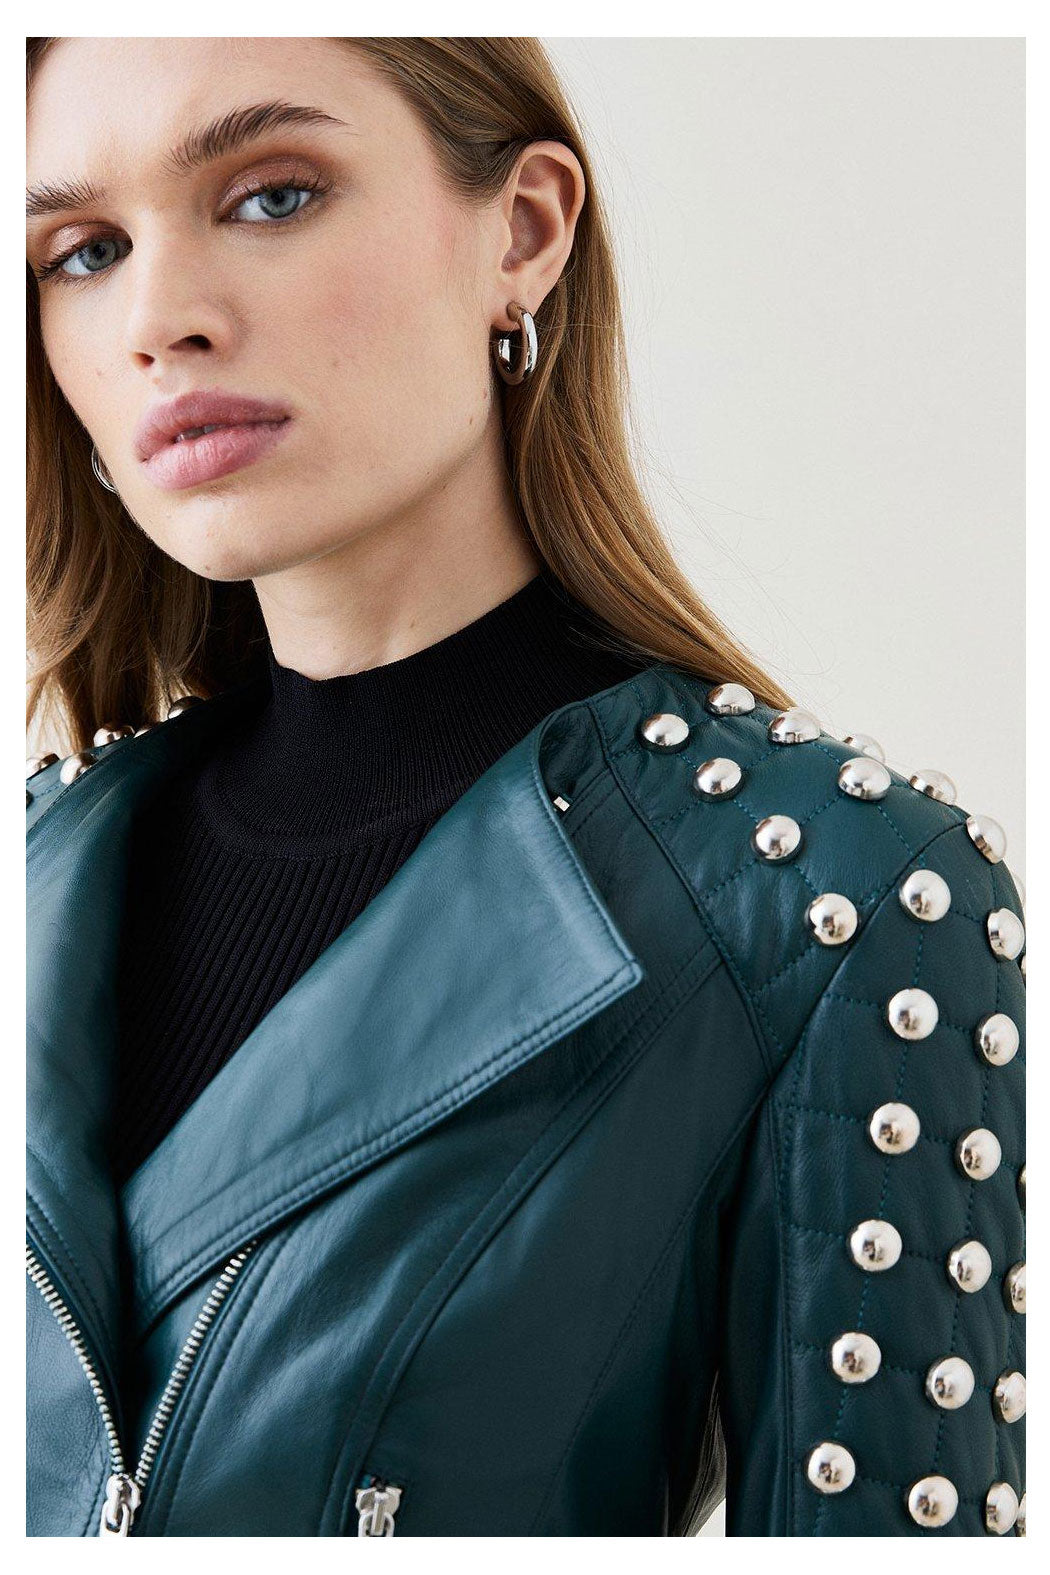 Women Chocolat Green Style Silver Spiked Studded Retro Motorcycle Leather Jacket